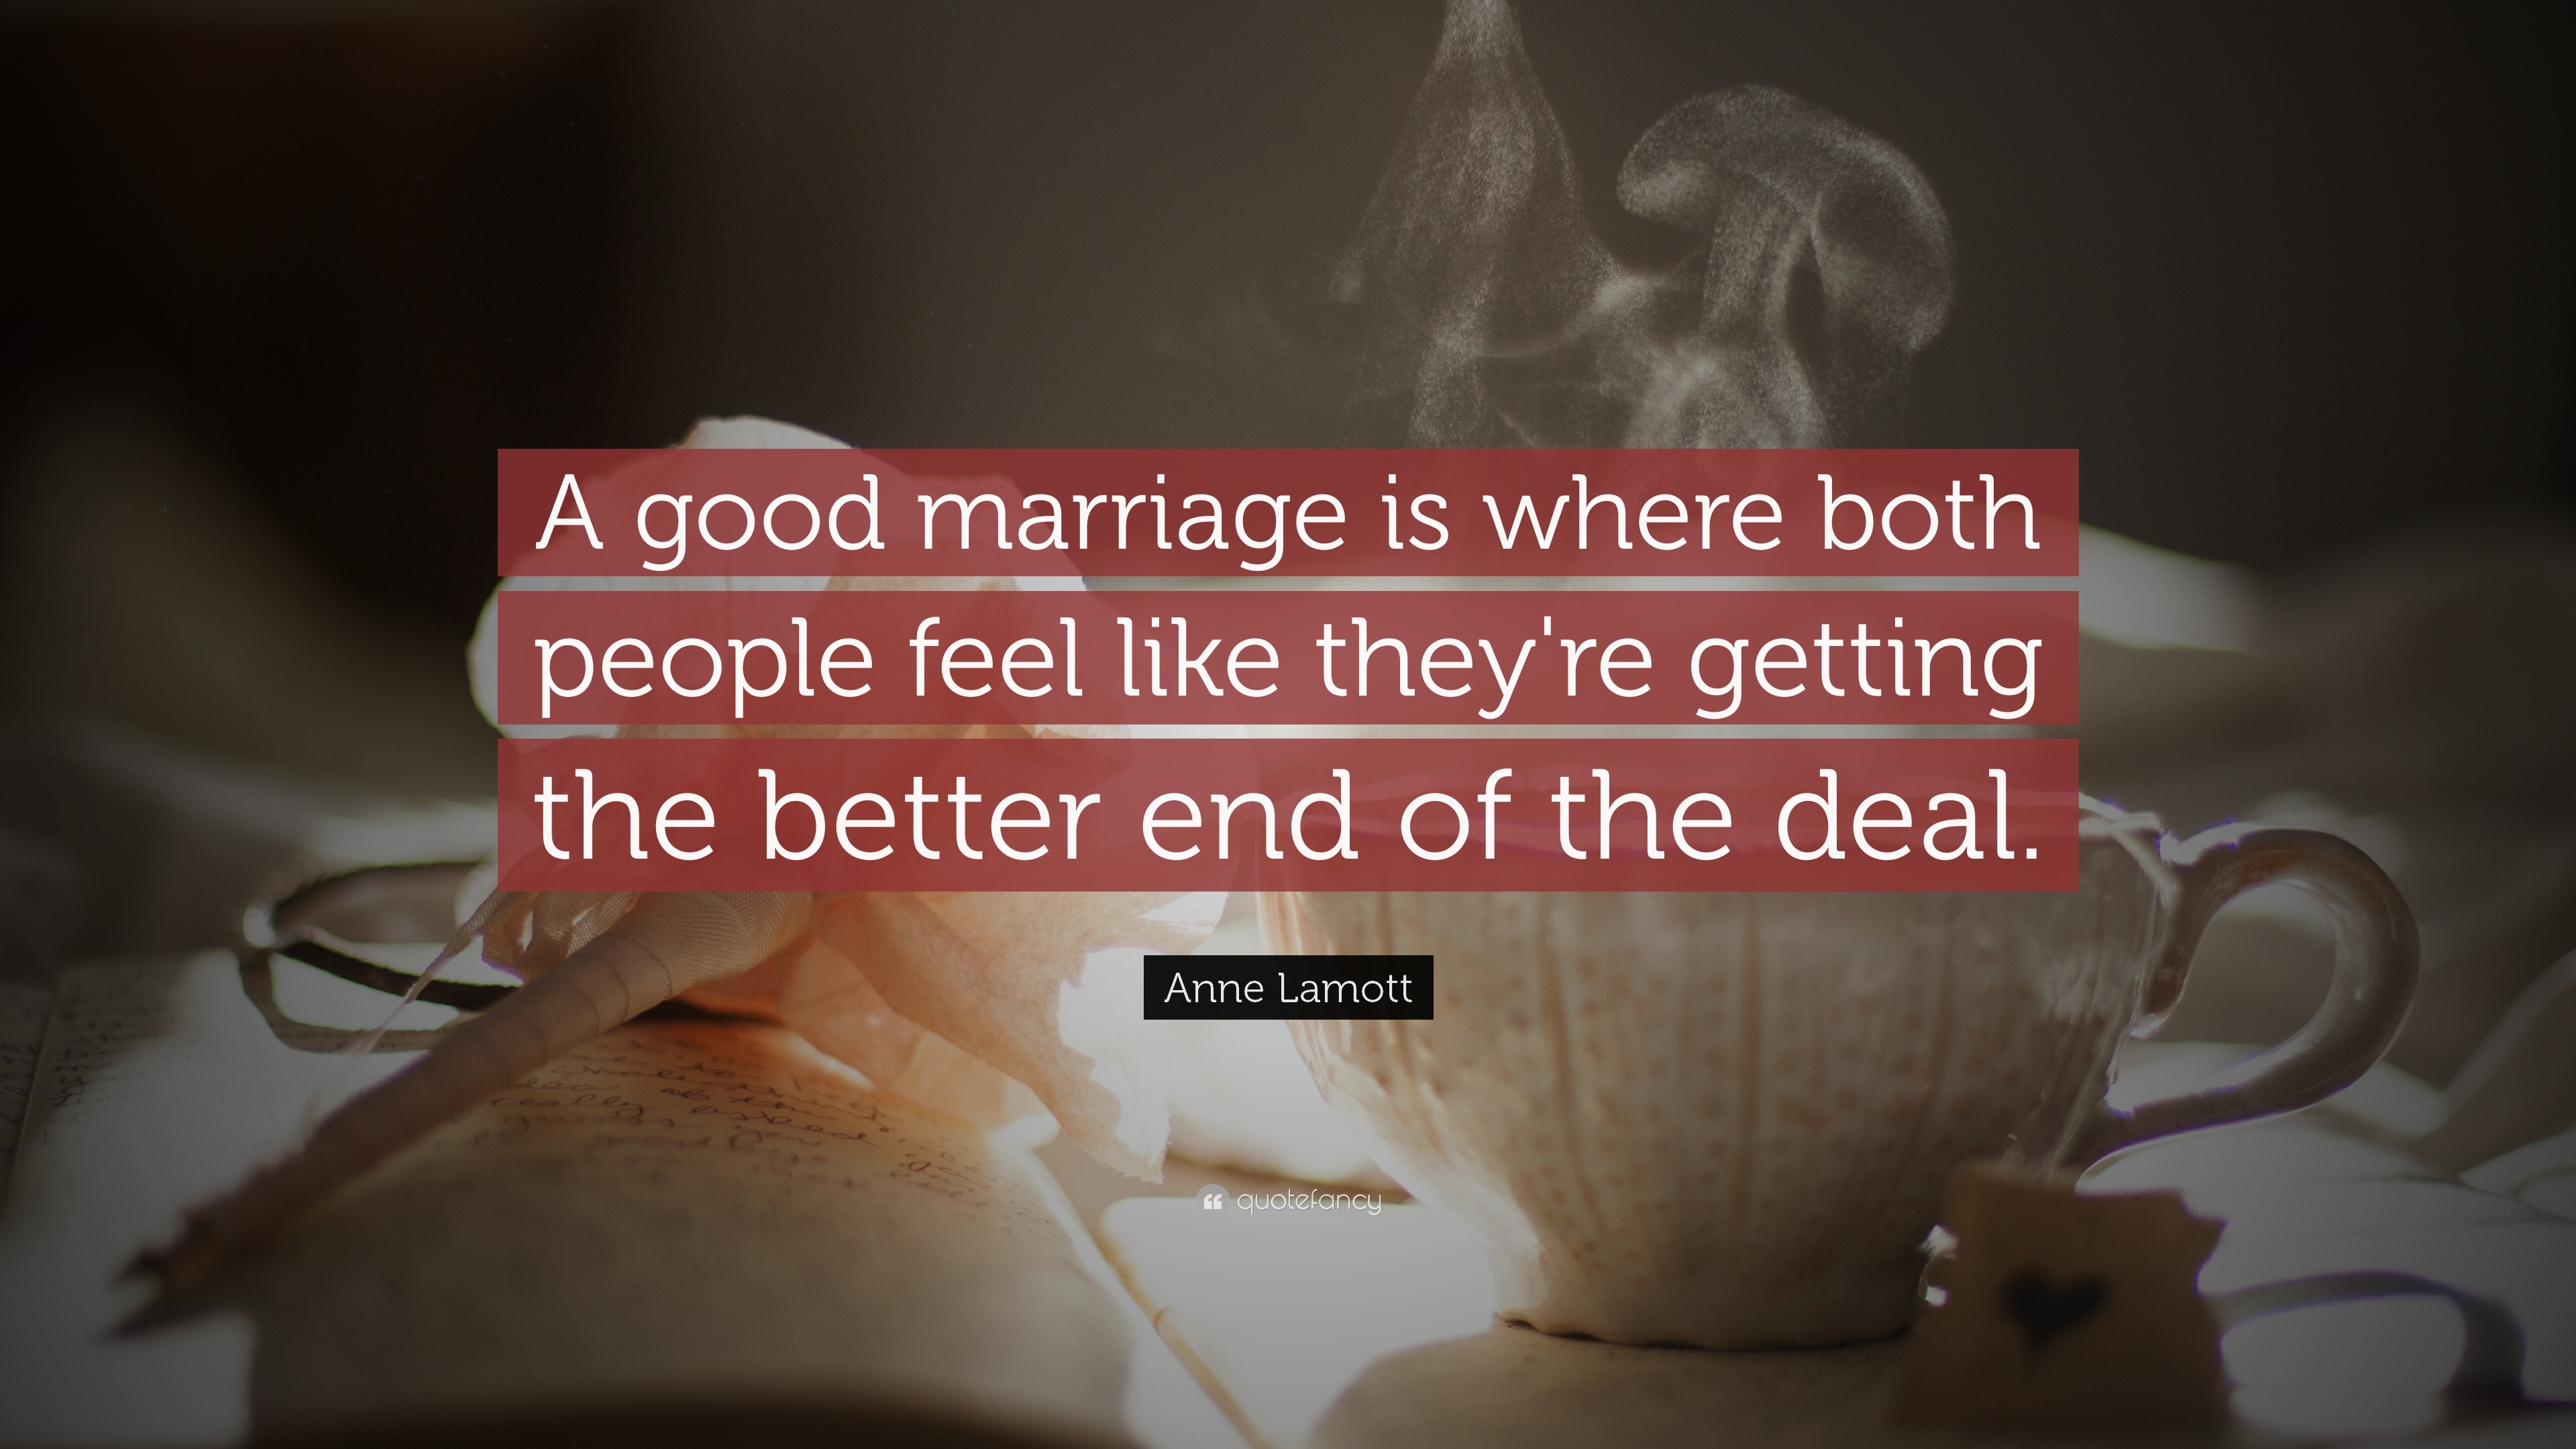 Anne Lamott Quote “A good marriage is where both people feel like they